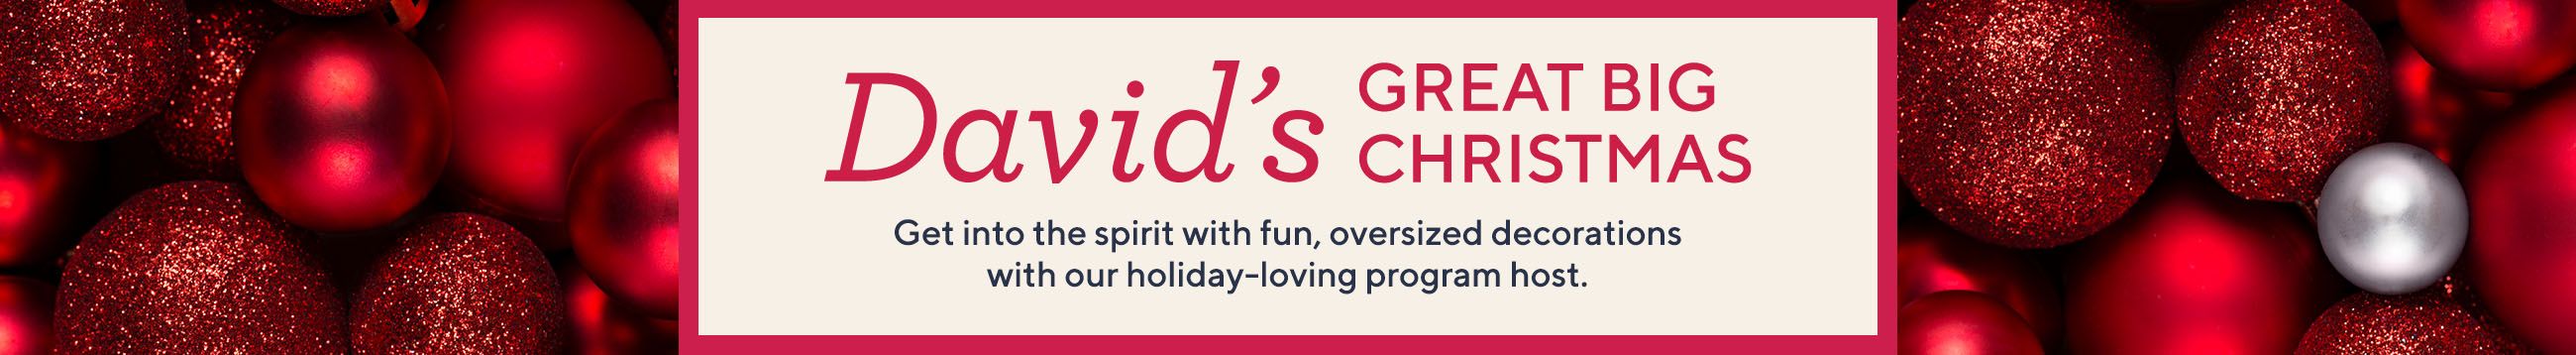 David's Great Big Christmas  Get into the spirit with fun, oversized decorations with our holiday-loving program host.